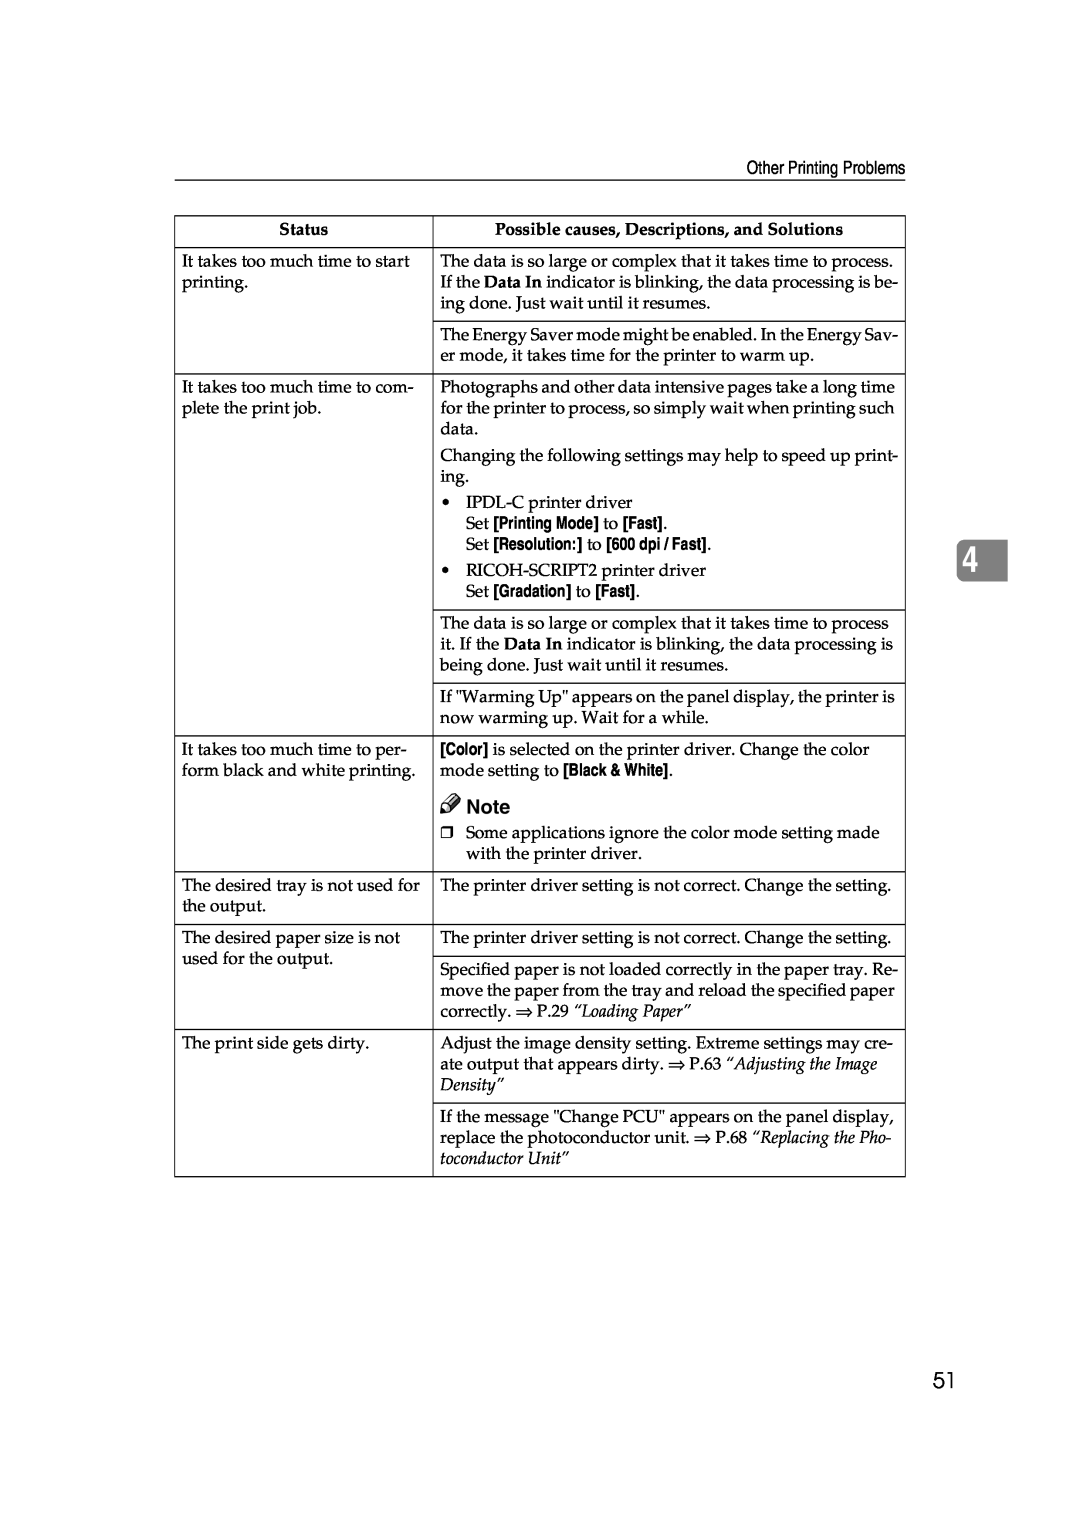 Lanier AP206 manual Status, Possible causes, Descriptions, and Solutions, Set Printing Mode to Fast, Set Gradation to Fast 